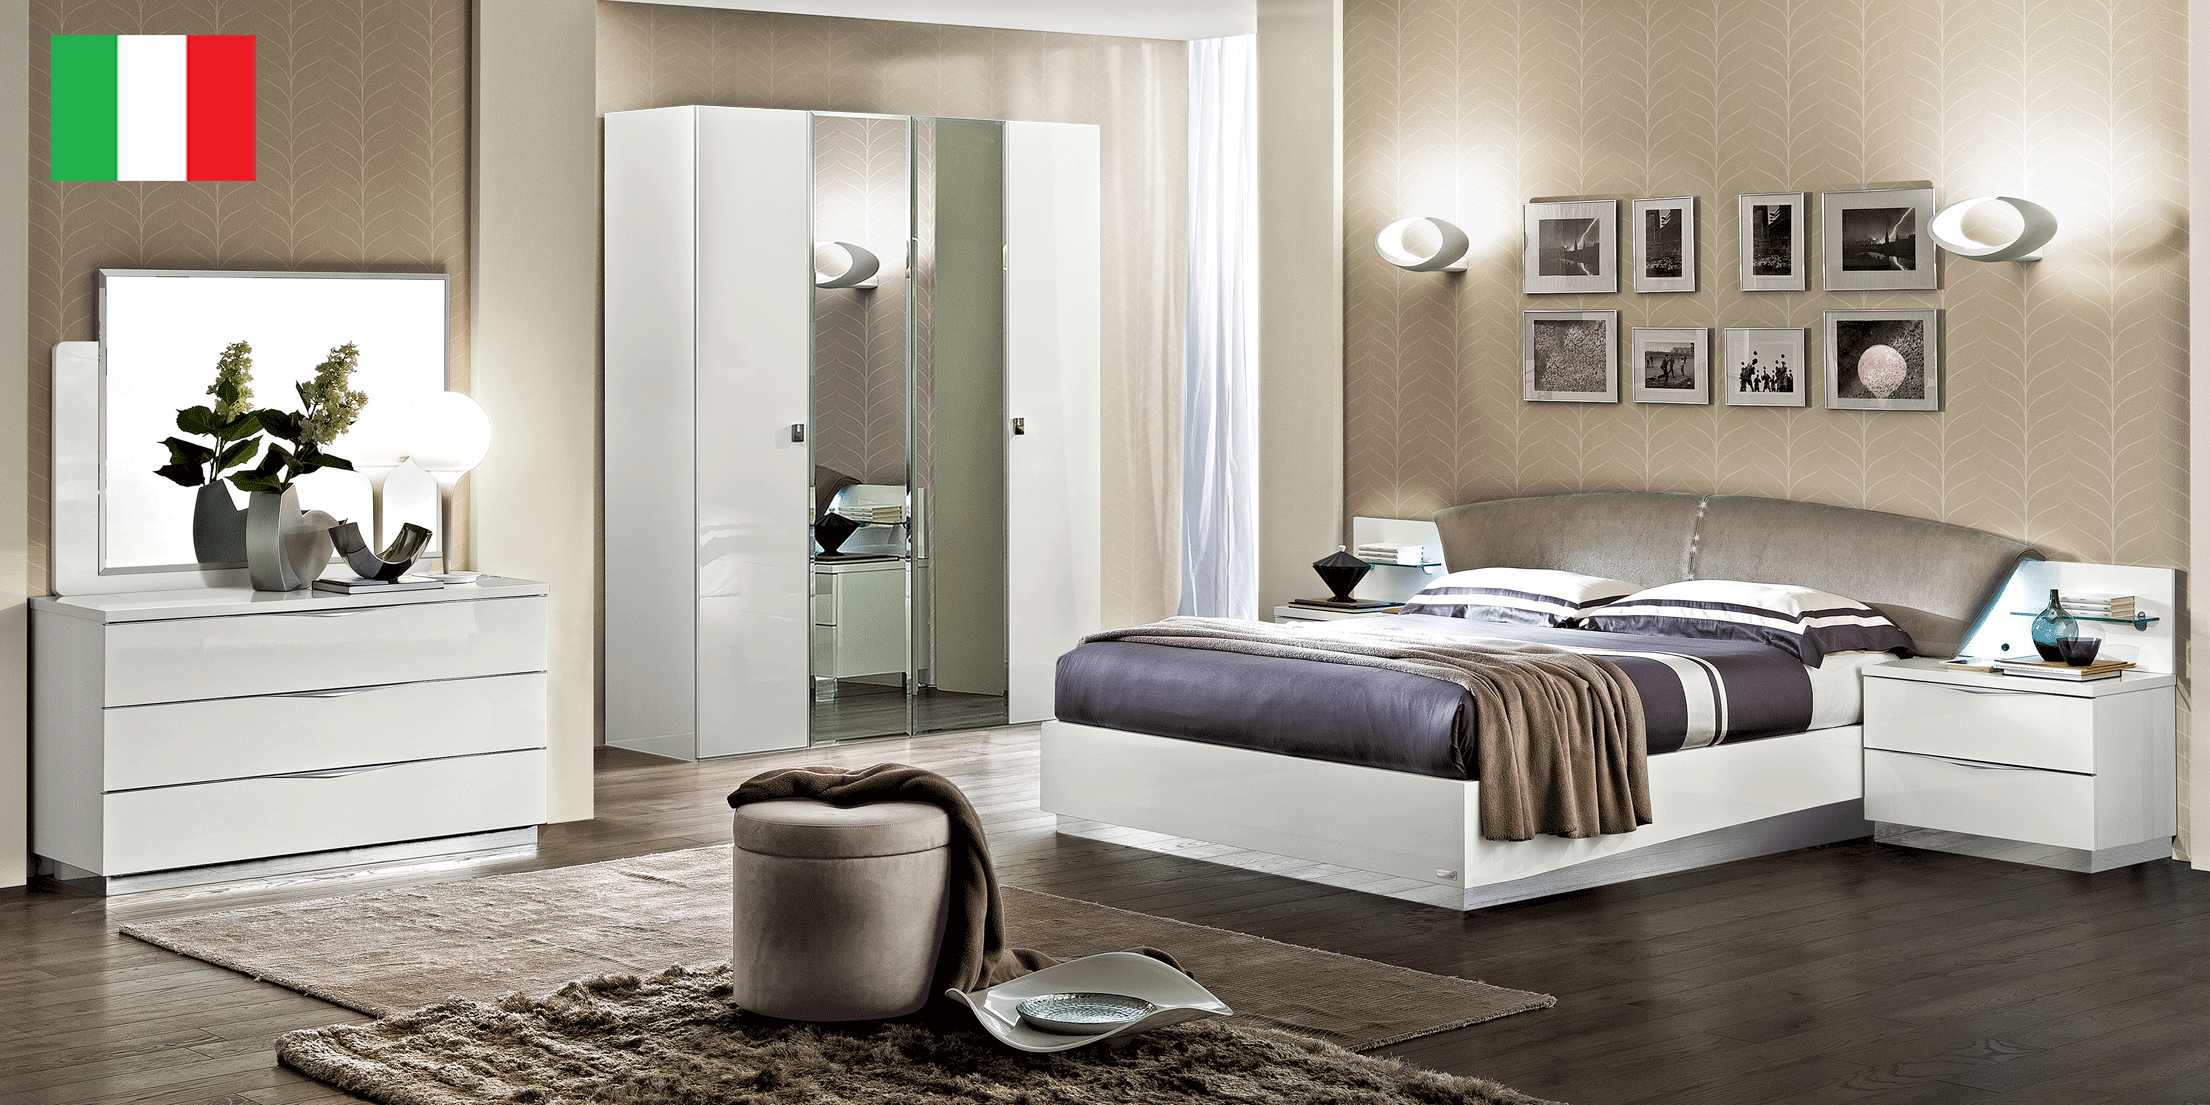 Brands Camel Gold Collection, Italy Onda DROP Bedroom WHITE